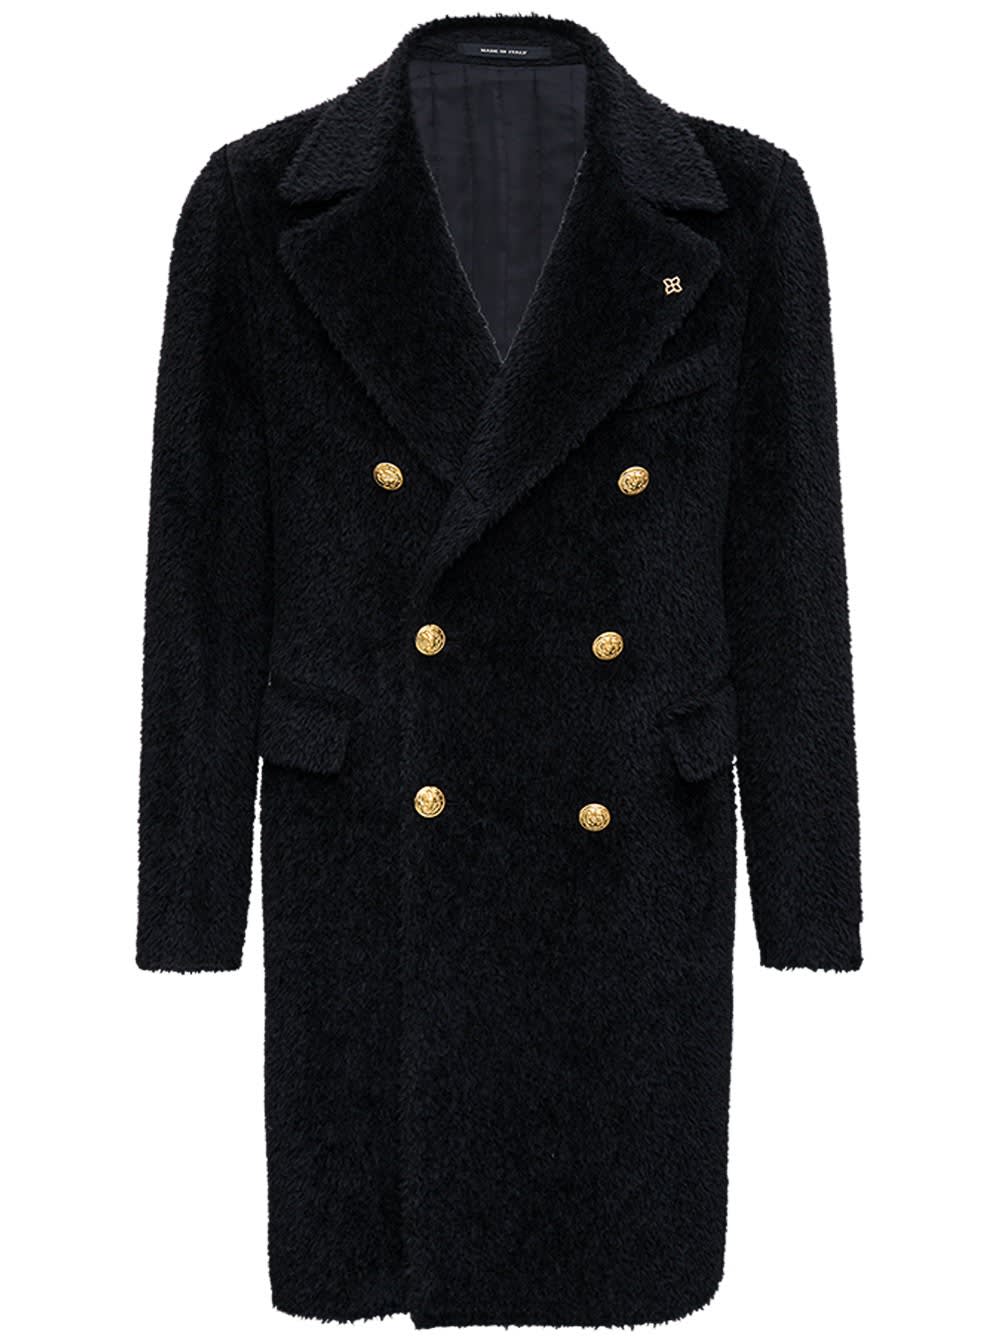 Tagliatore Double-breasted Wool Teddy Coat